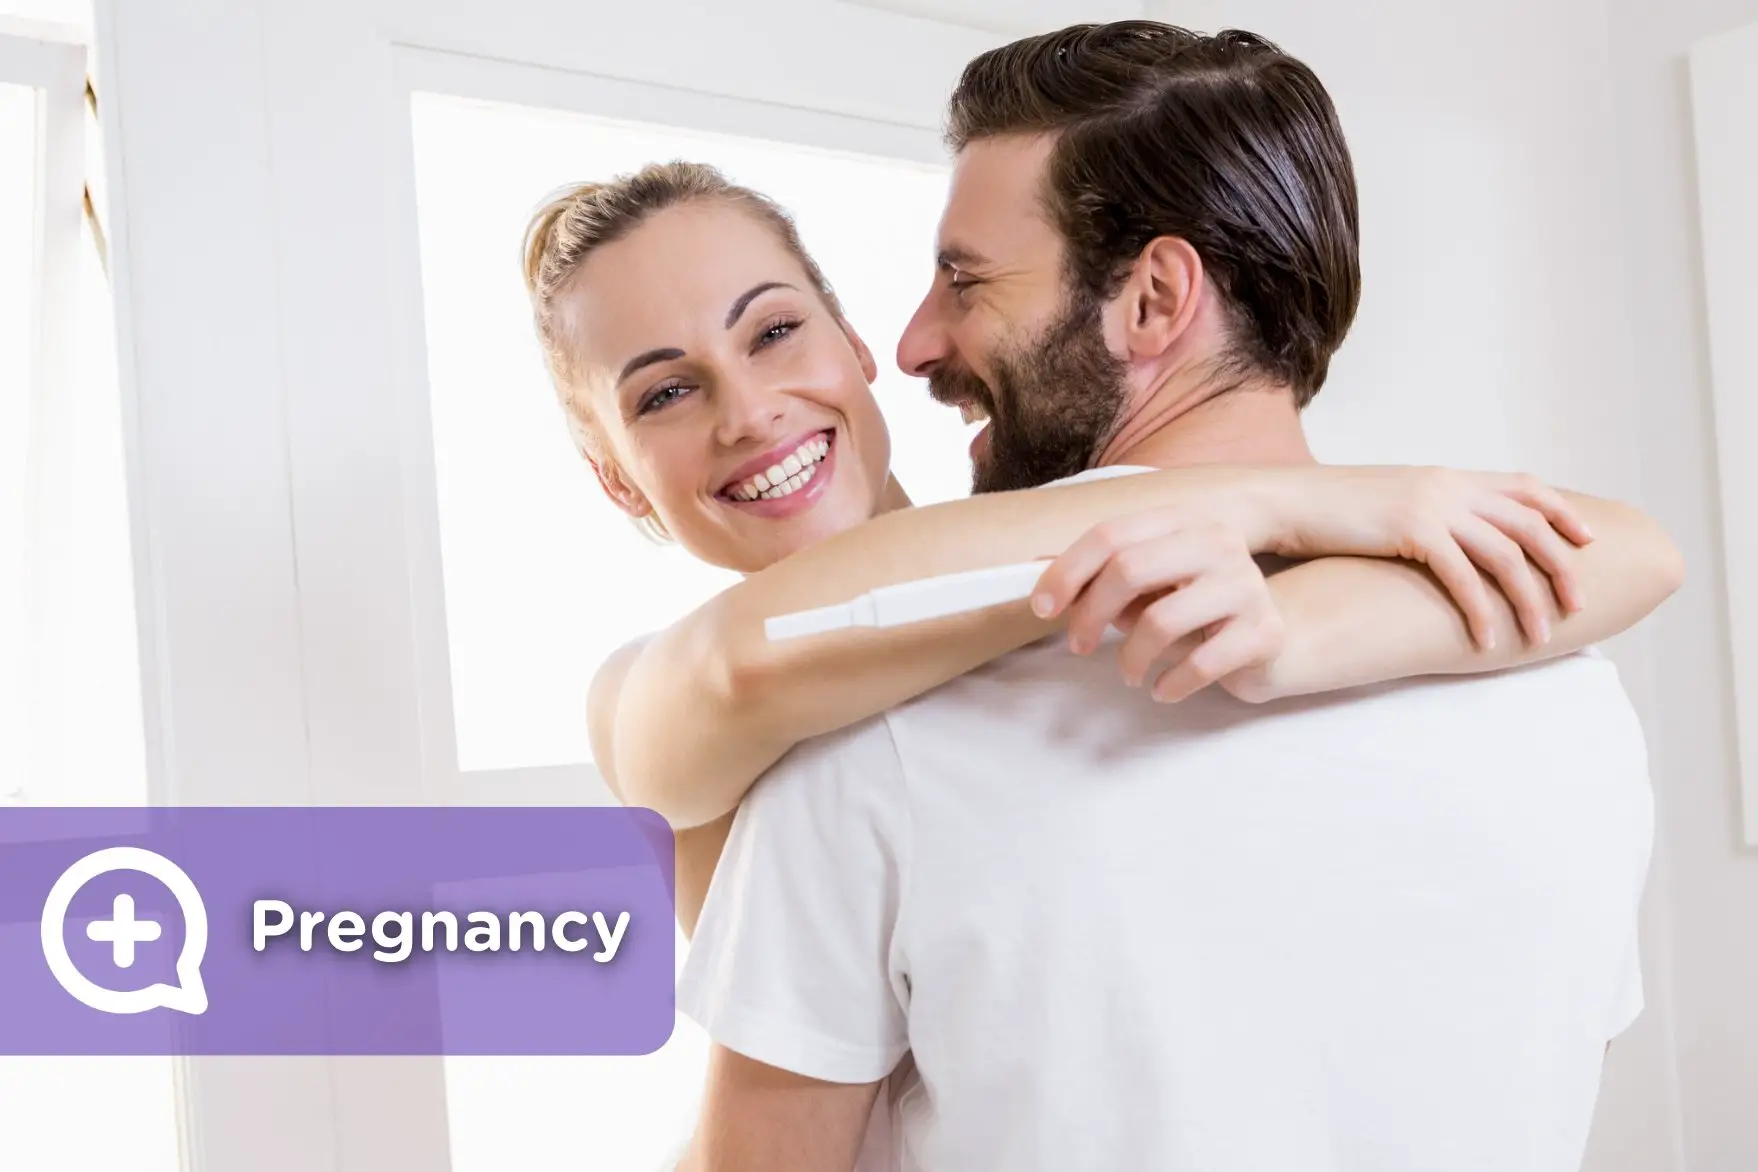 How can I know if I am pregnant?